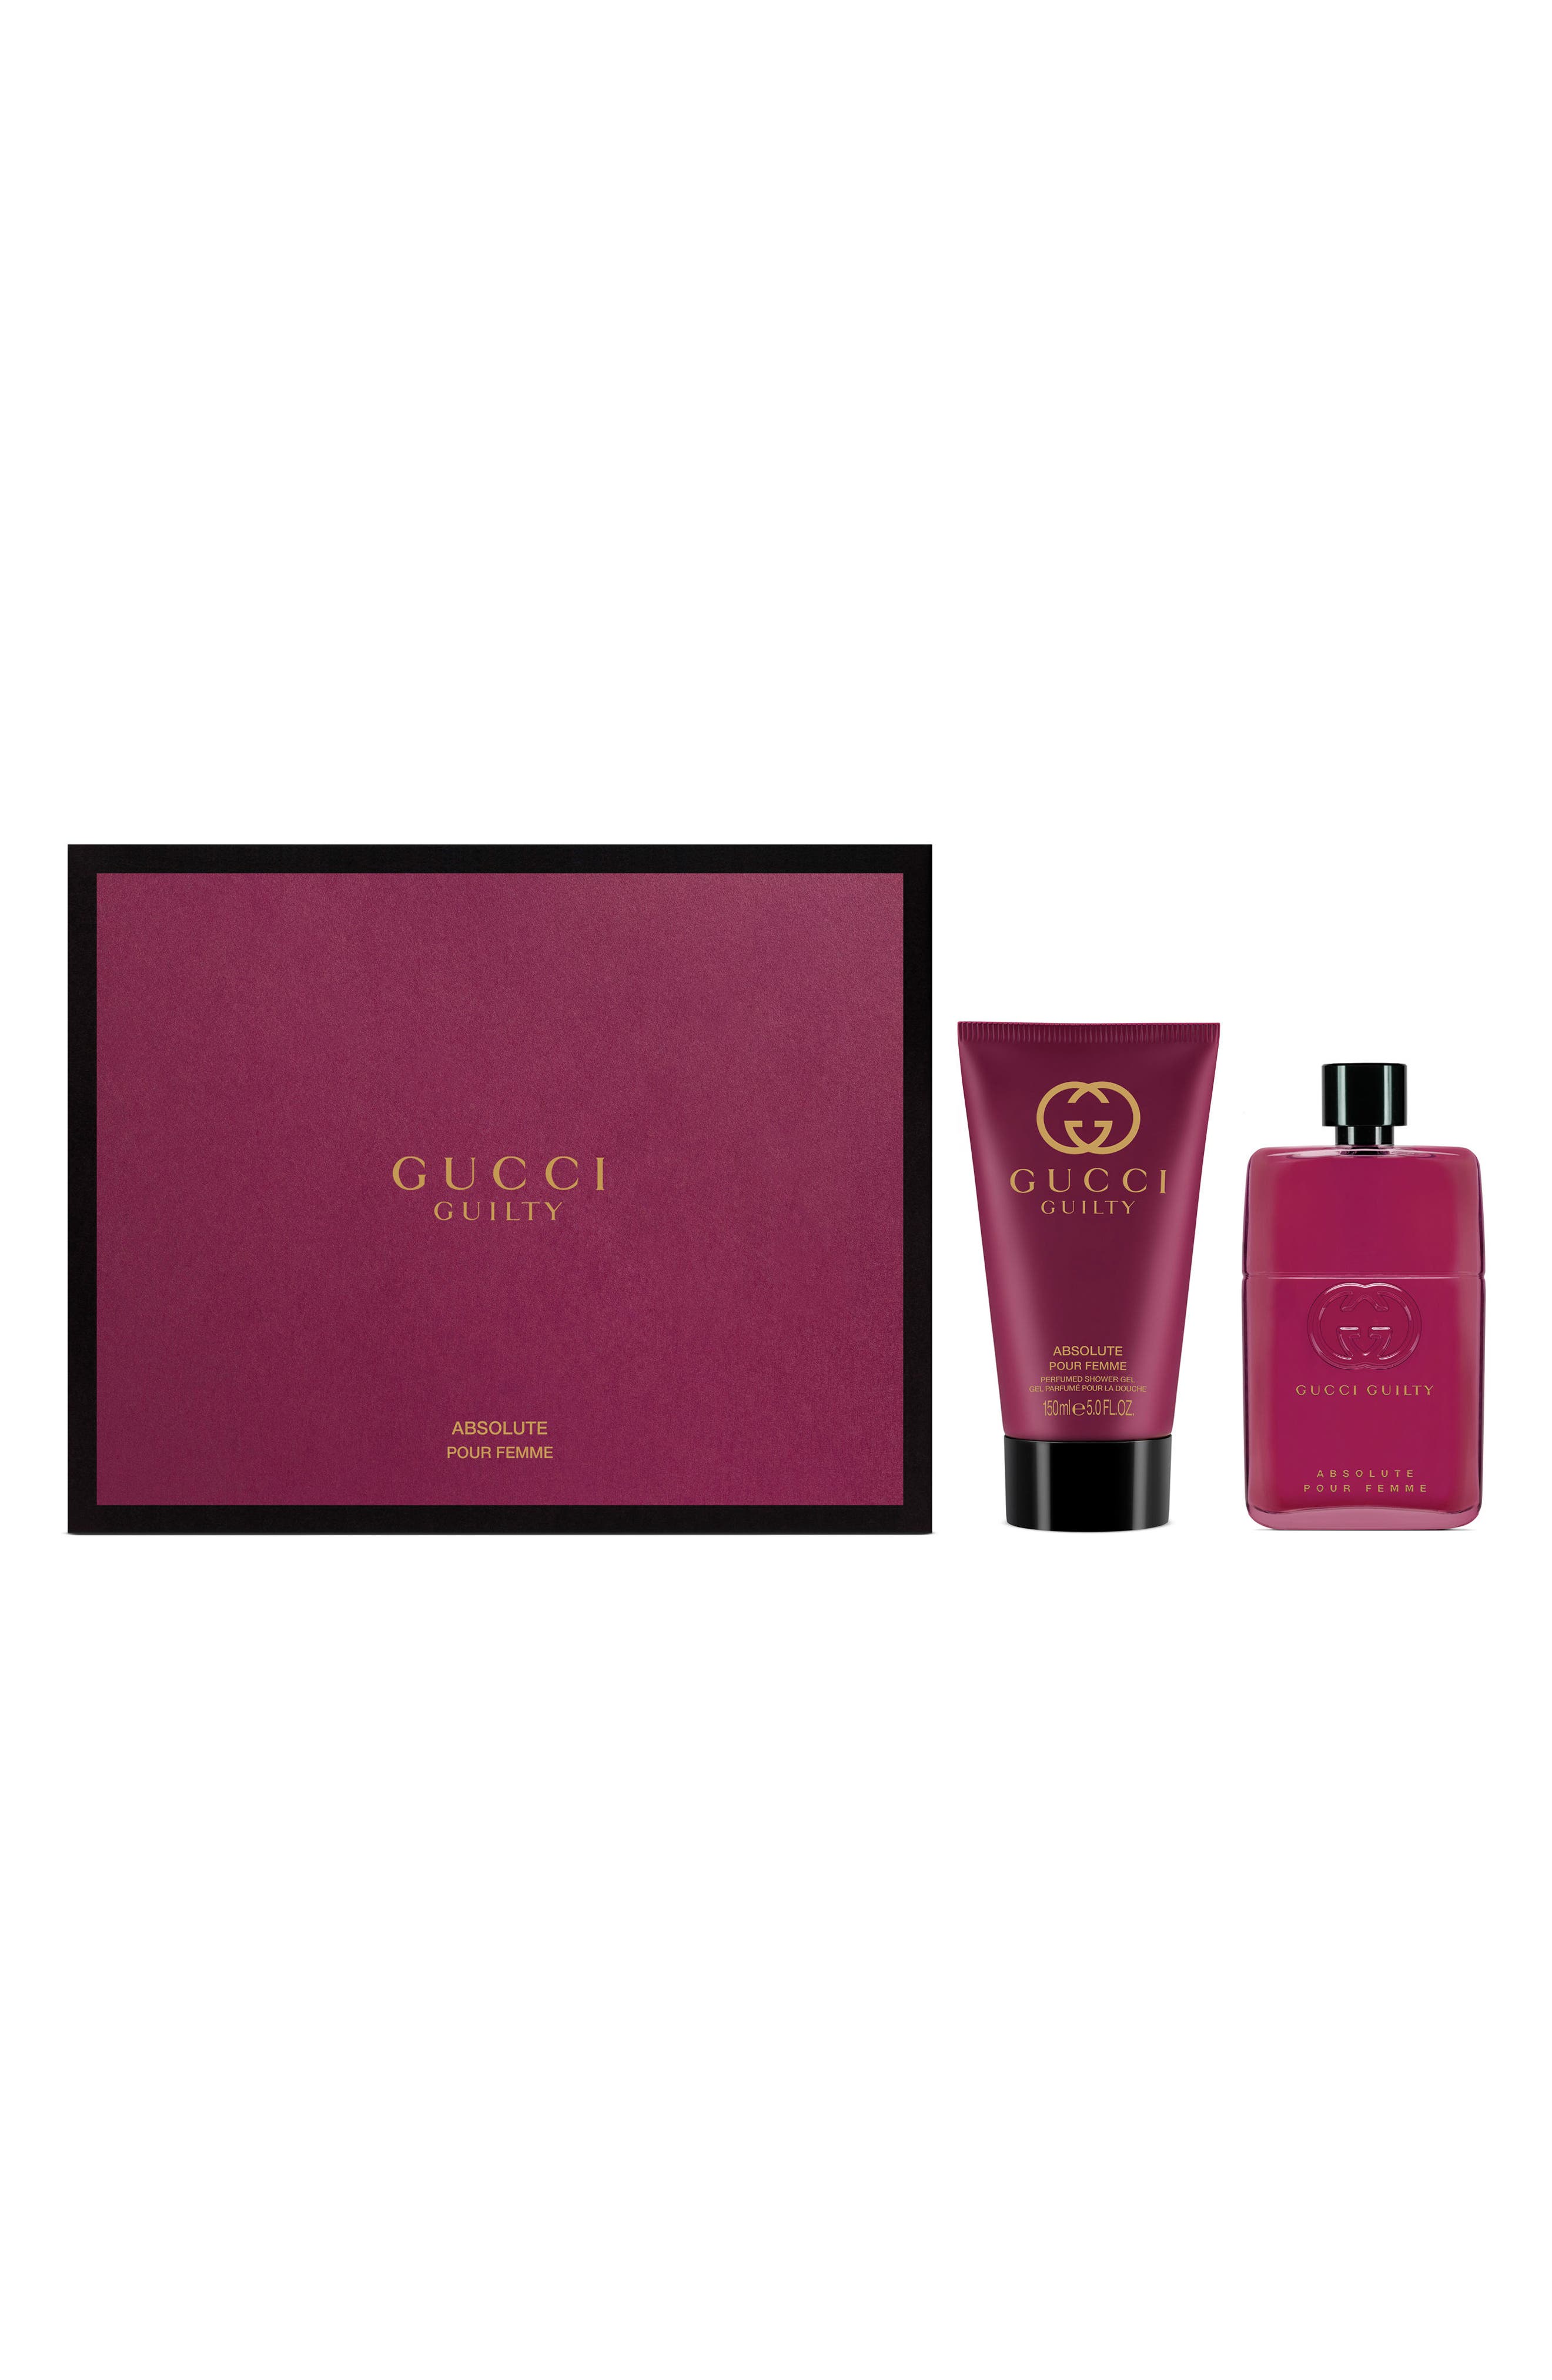 gucci guilty absolute pour femme gift set